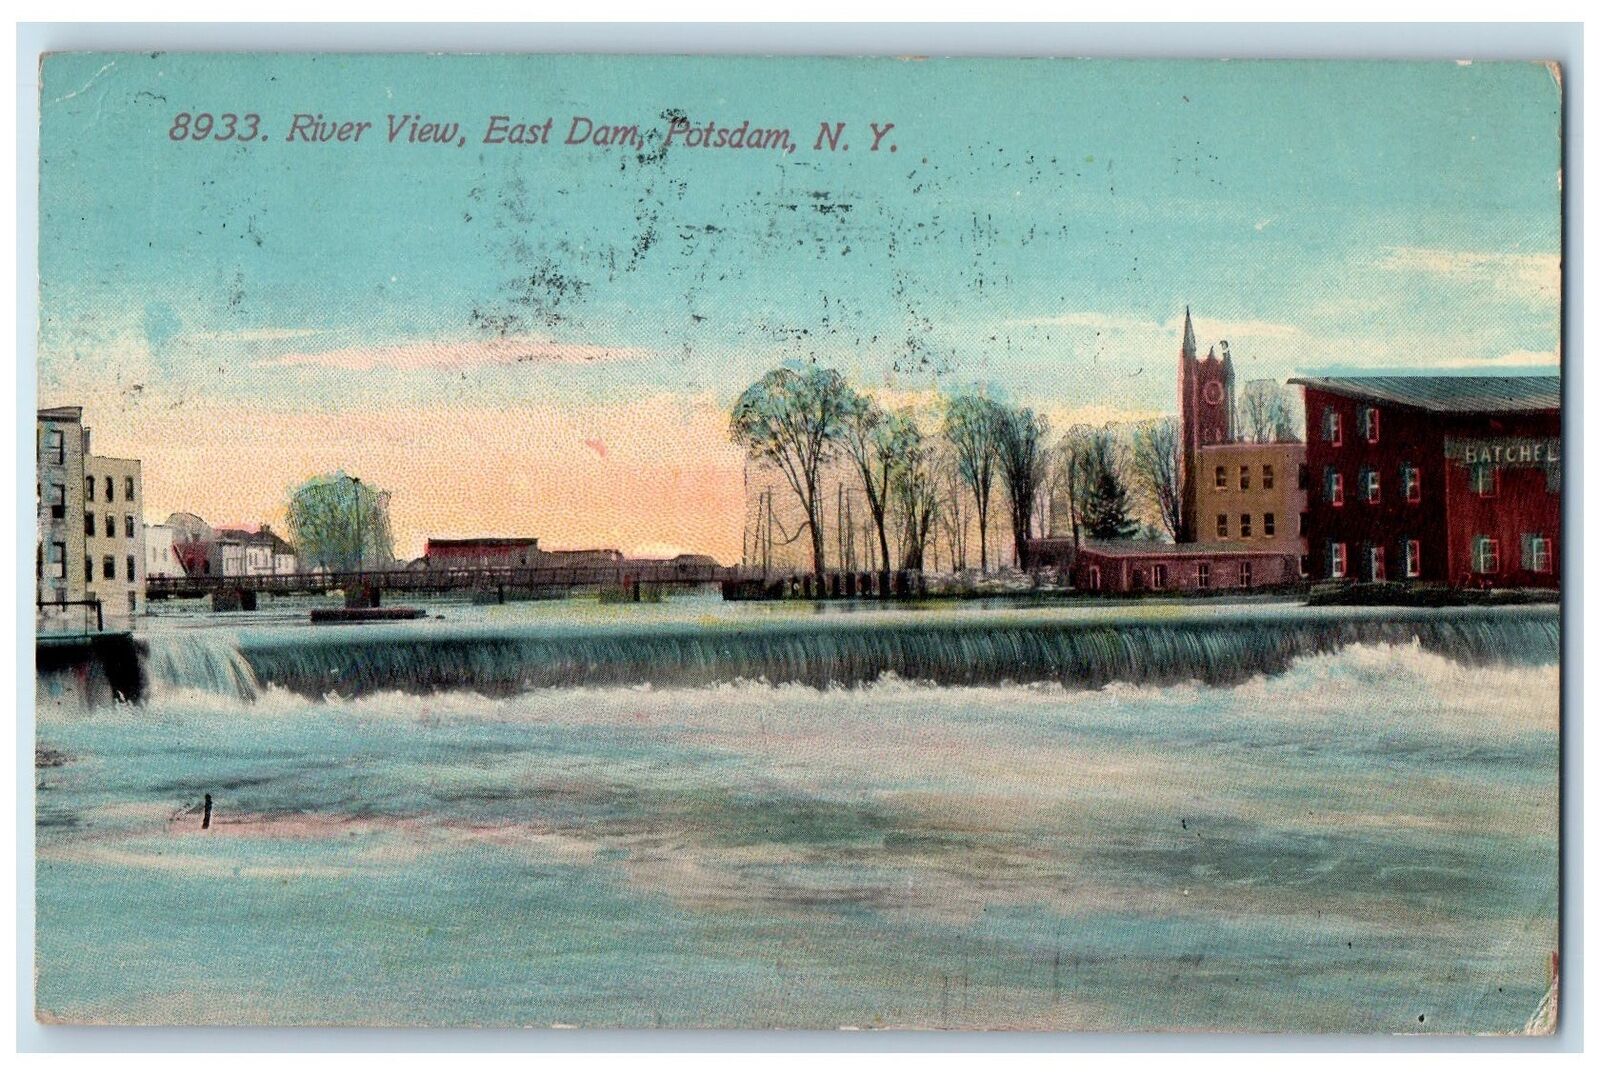 1912 River View East Dam Trees Scene Potsdam New York NY Posted Vintage Postcard